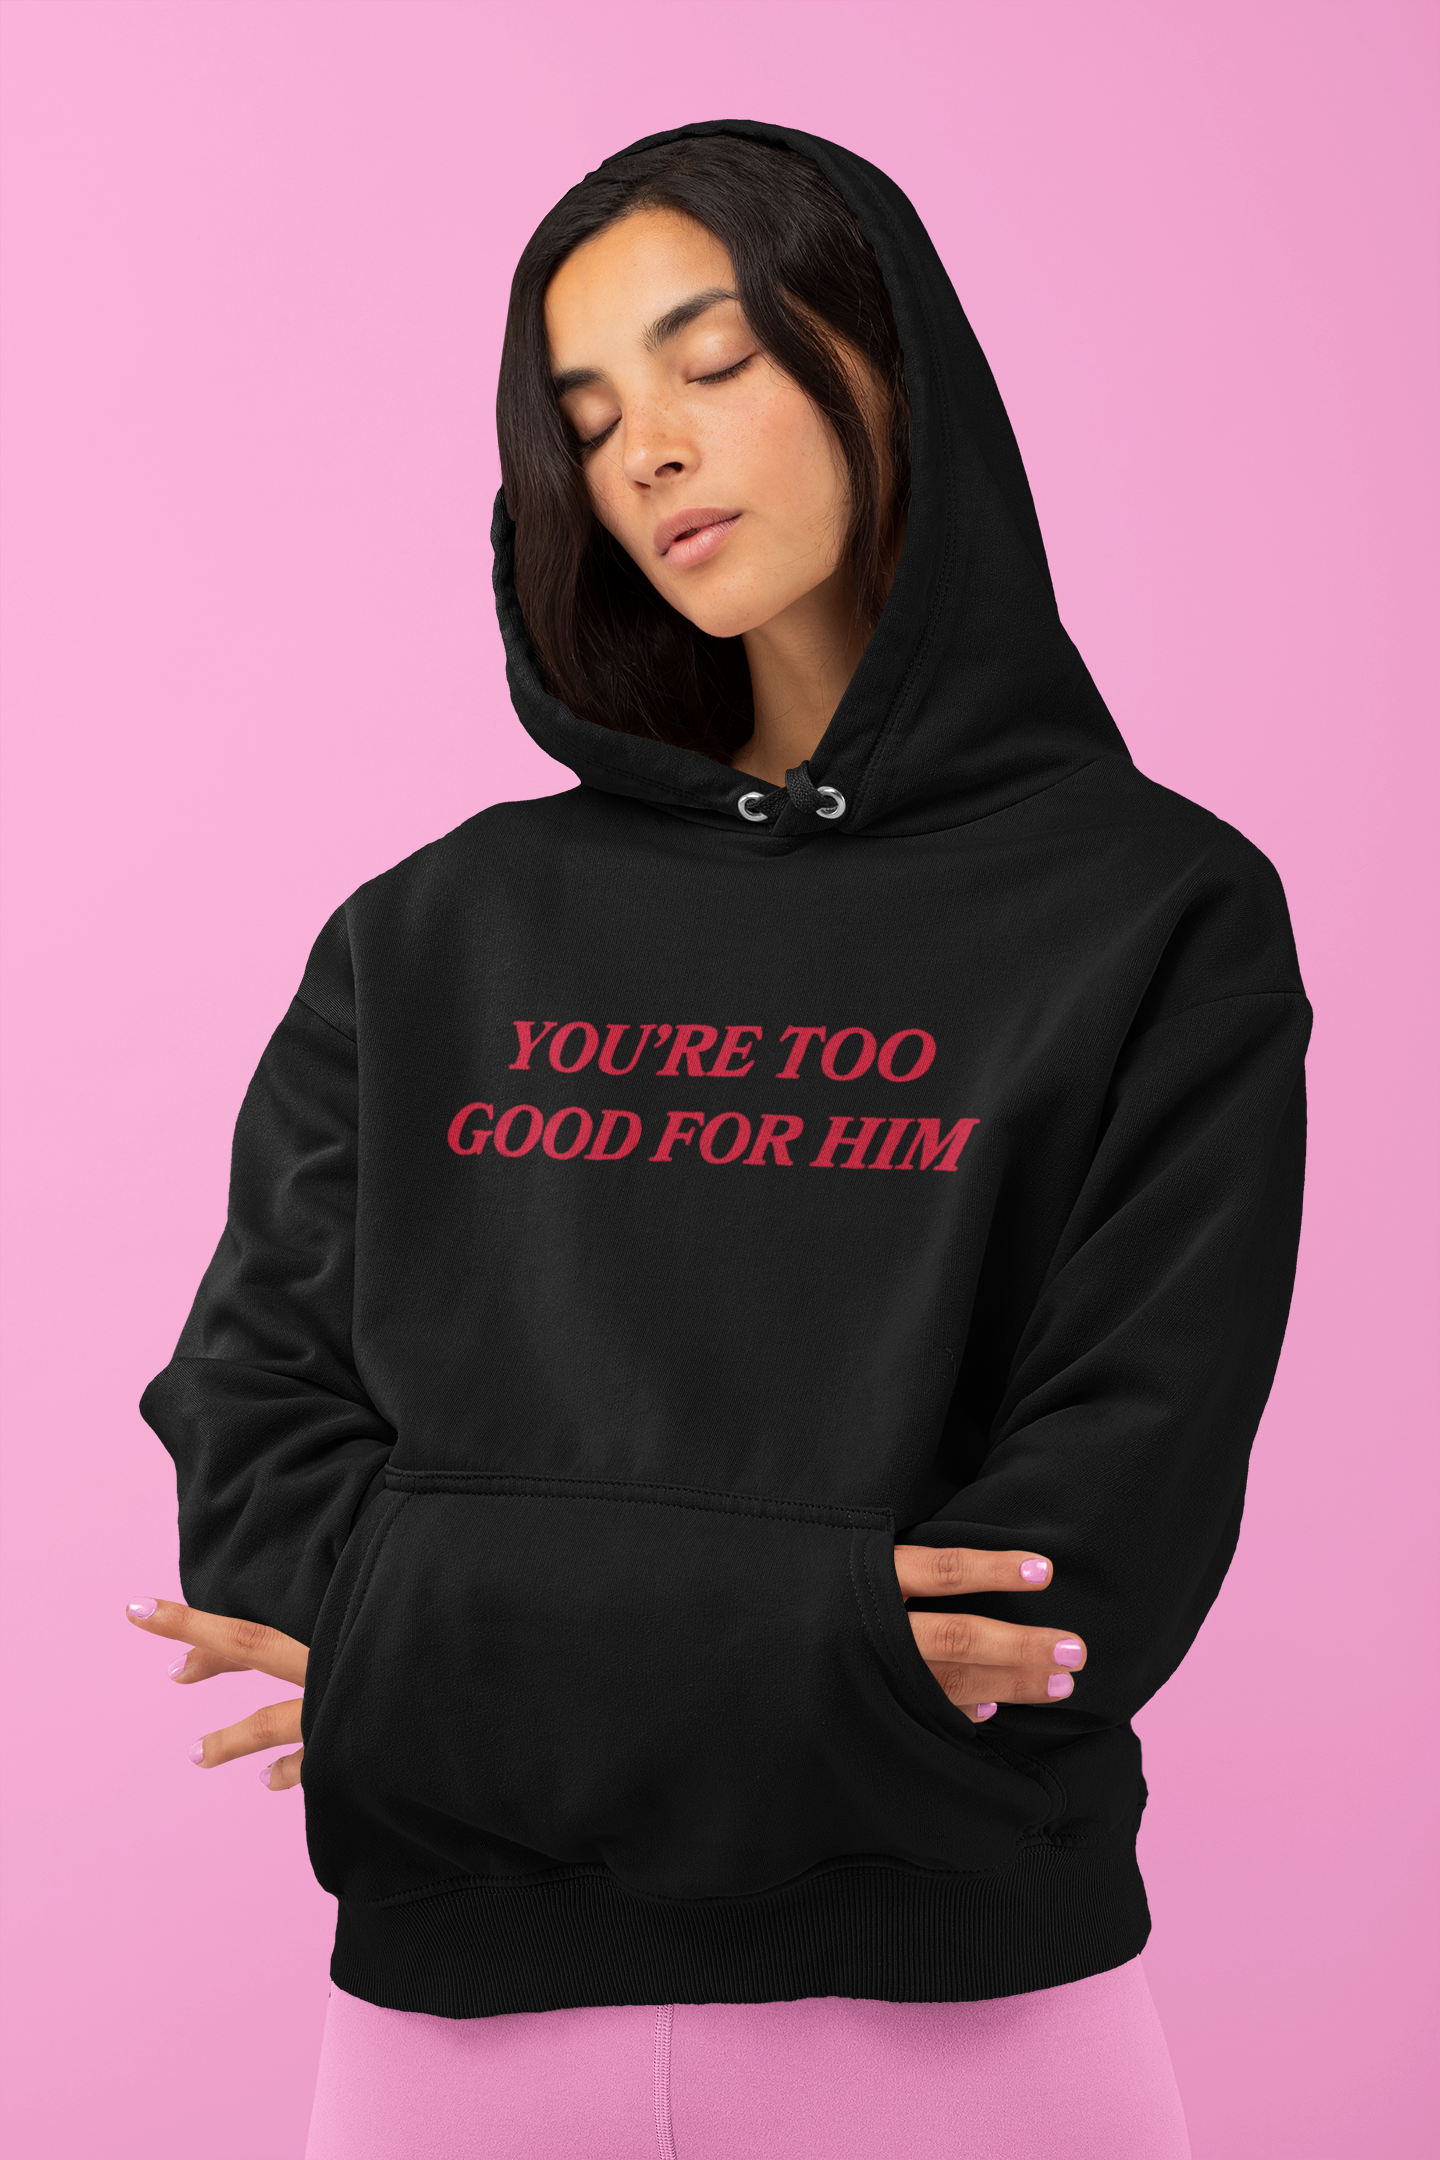 You're Too Good For Him Unisex Feminist Hoodie - Feminist Trash Store - Shop Women’s Rights T-shirts - Oversized Women’s Hoodie